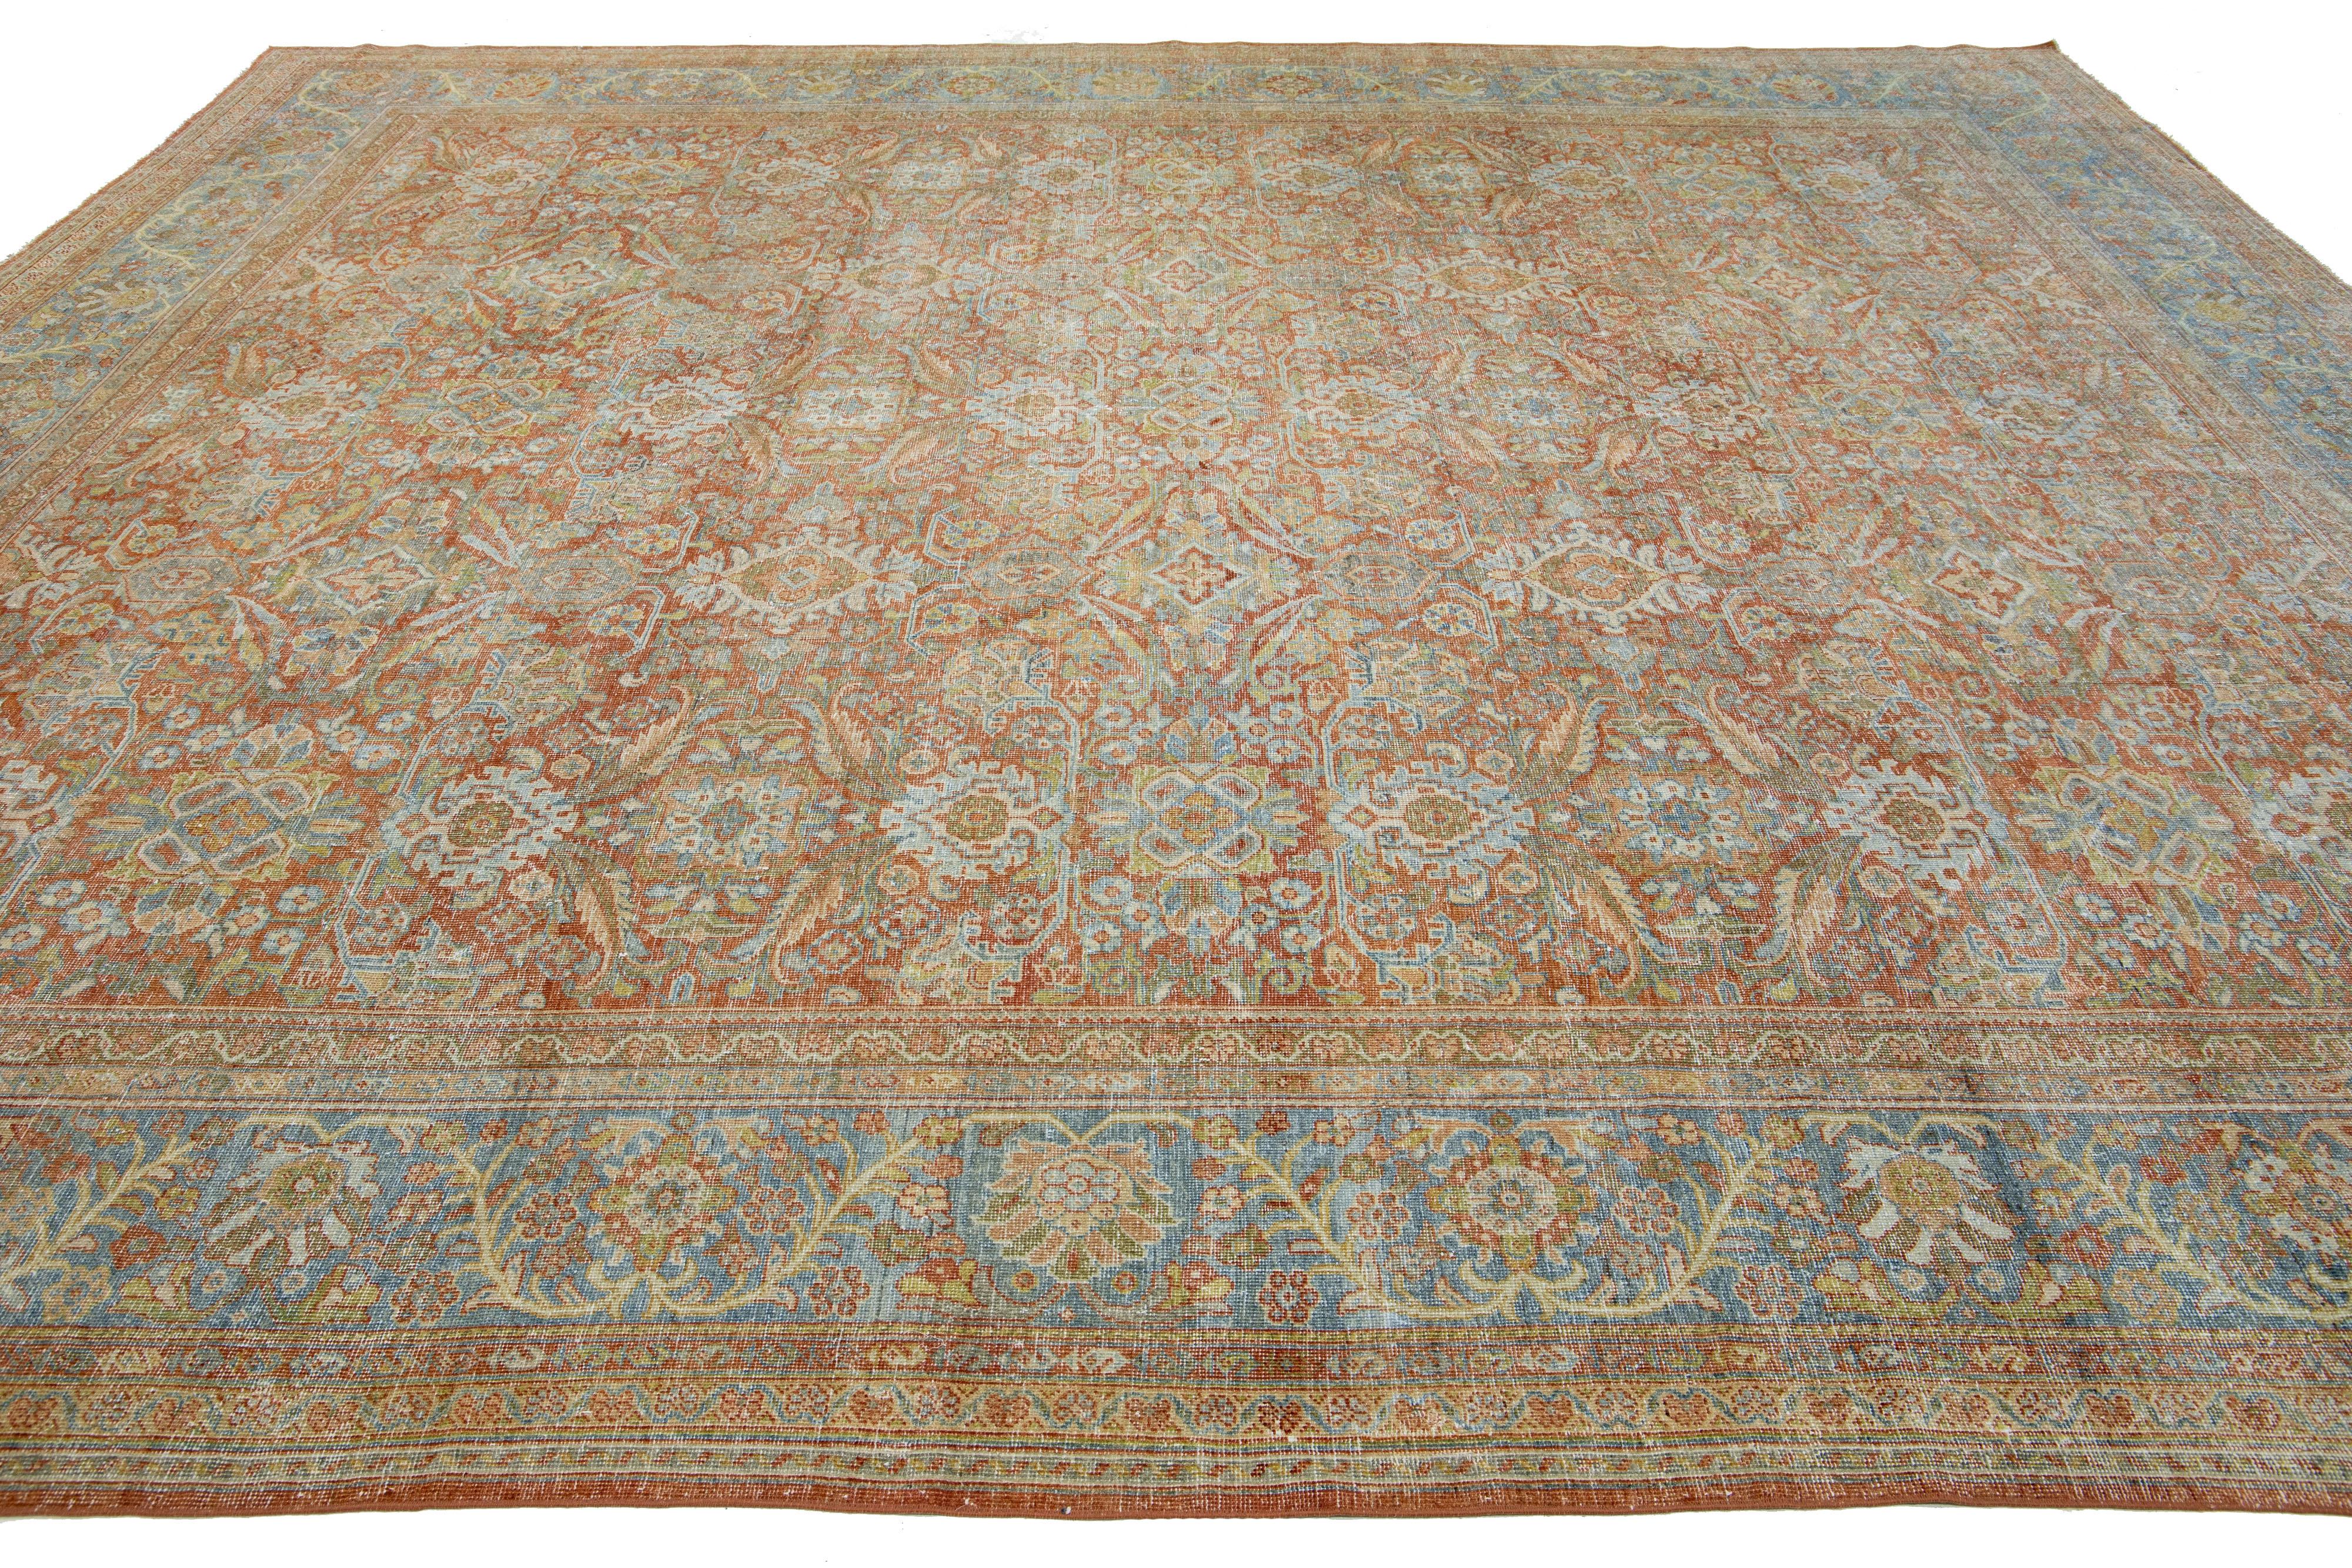 1900s Antique Persian Mahal Rust Wool Rug With Allover Floral Pattern In Good Condition For Sale In Norwalk, CT